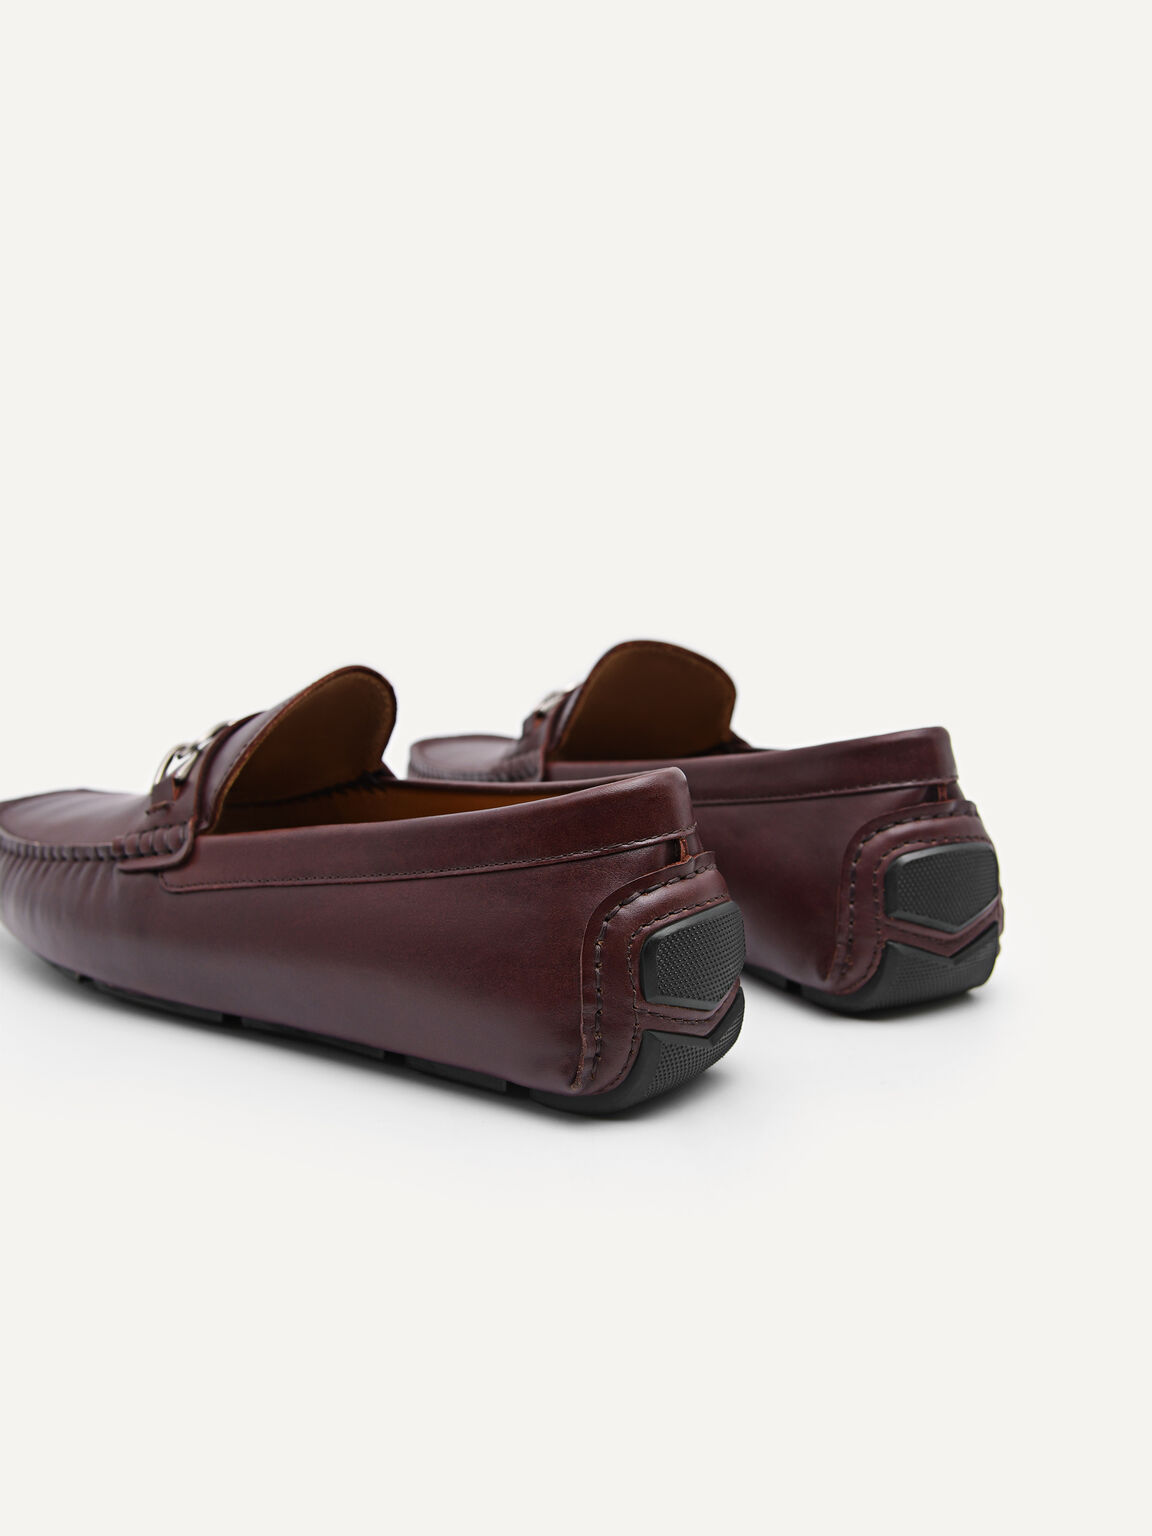 Leather Moccasins with Chain Detail, Dark Brown